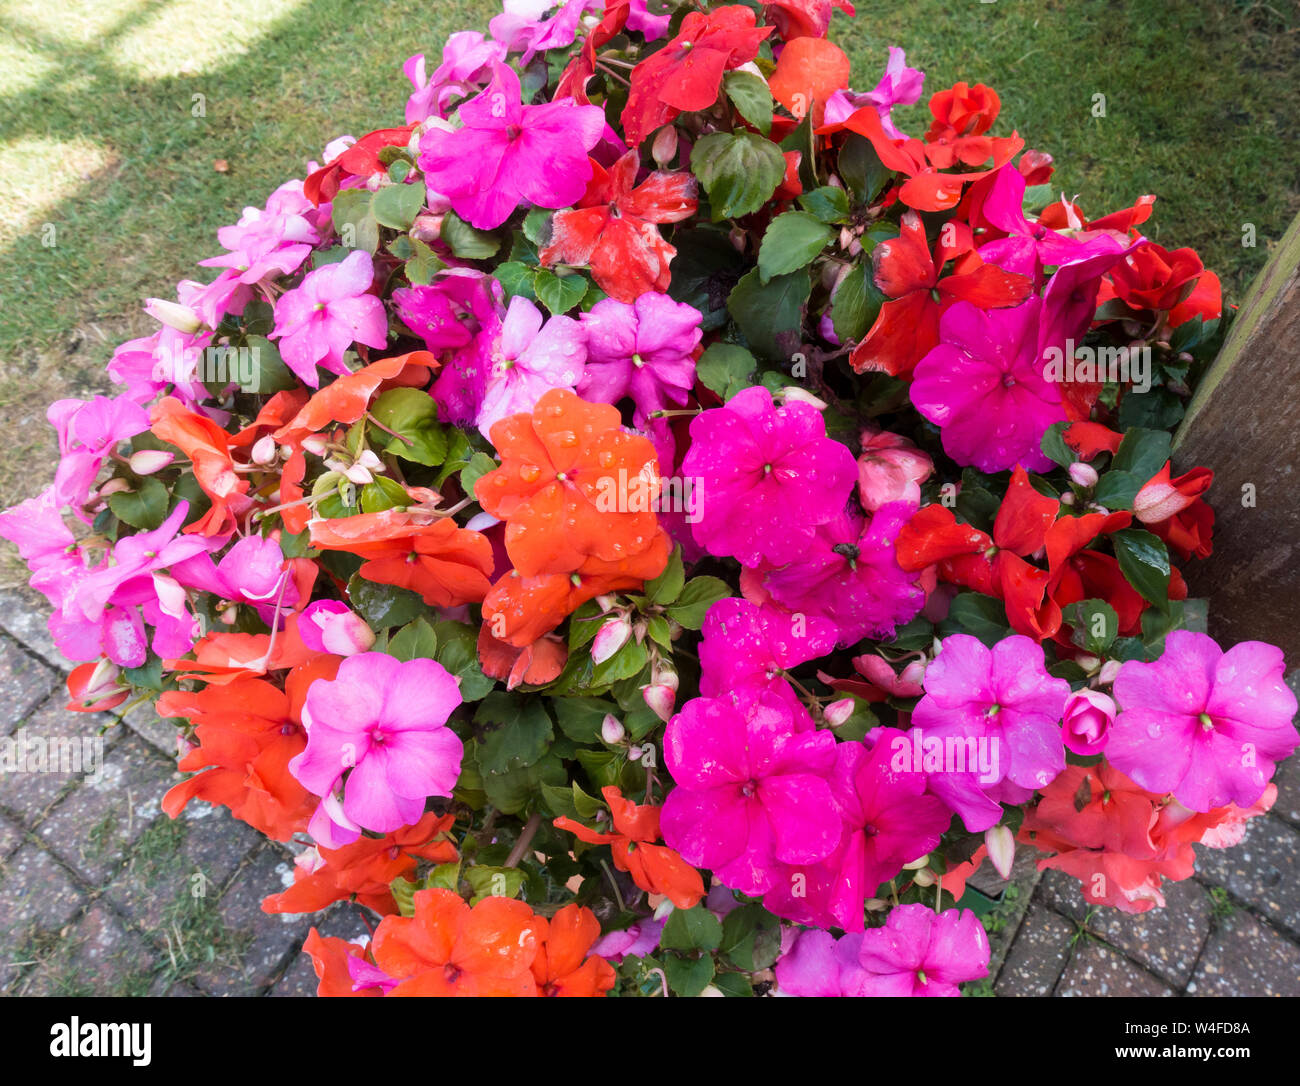 Colourful flowers in planter Stock Photo